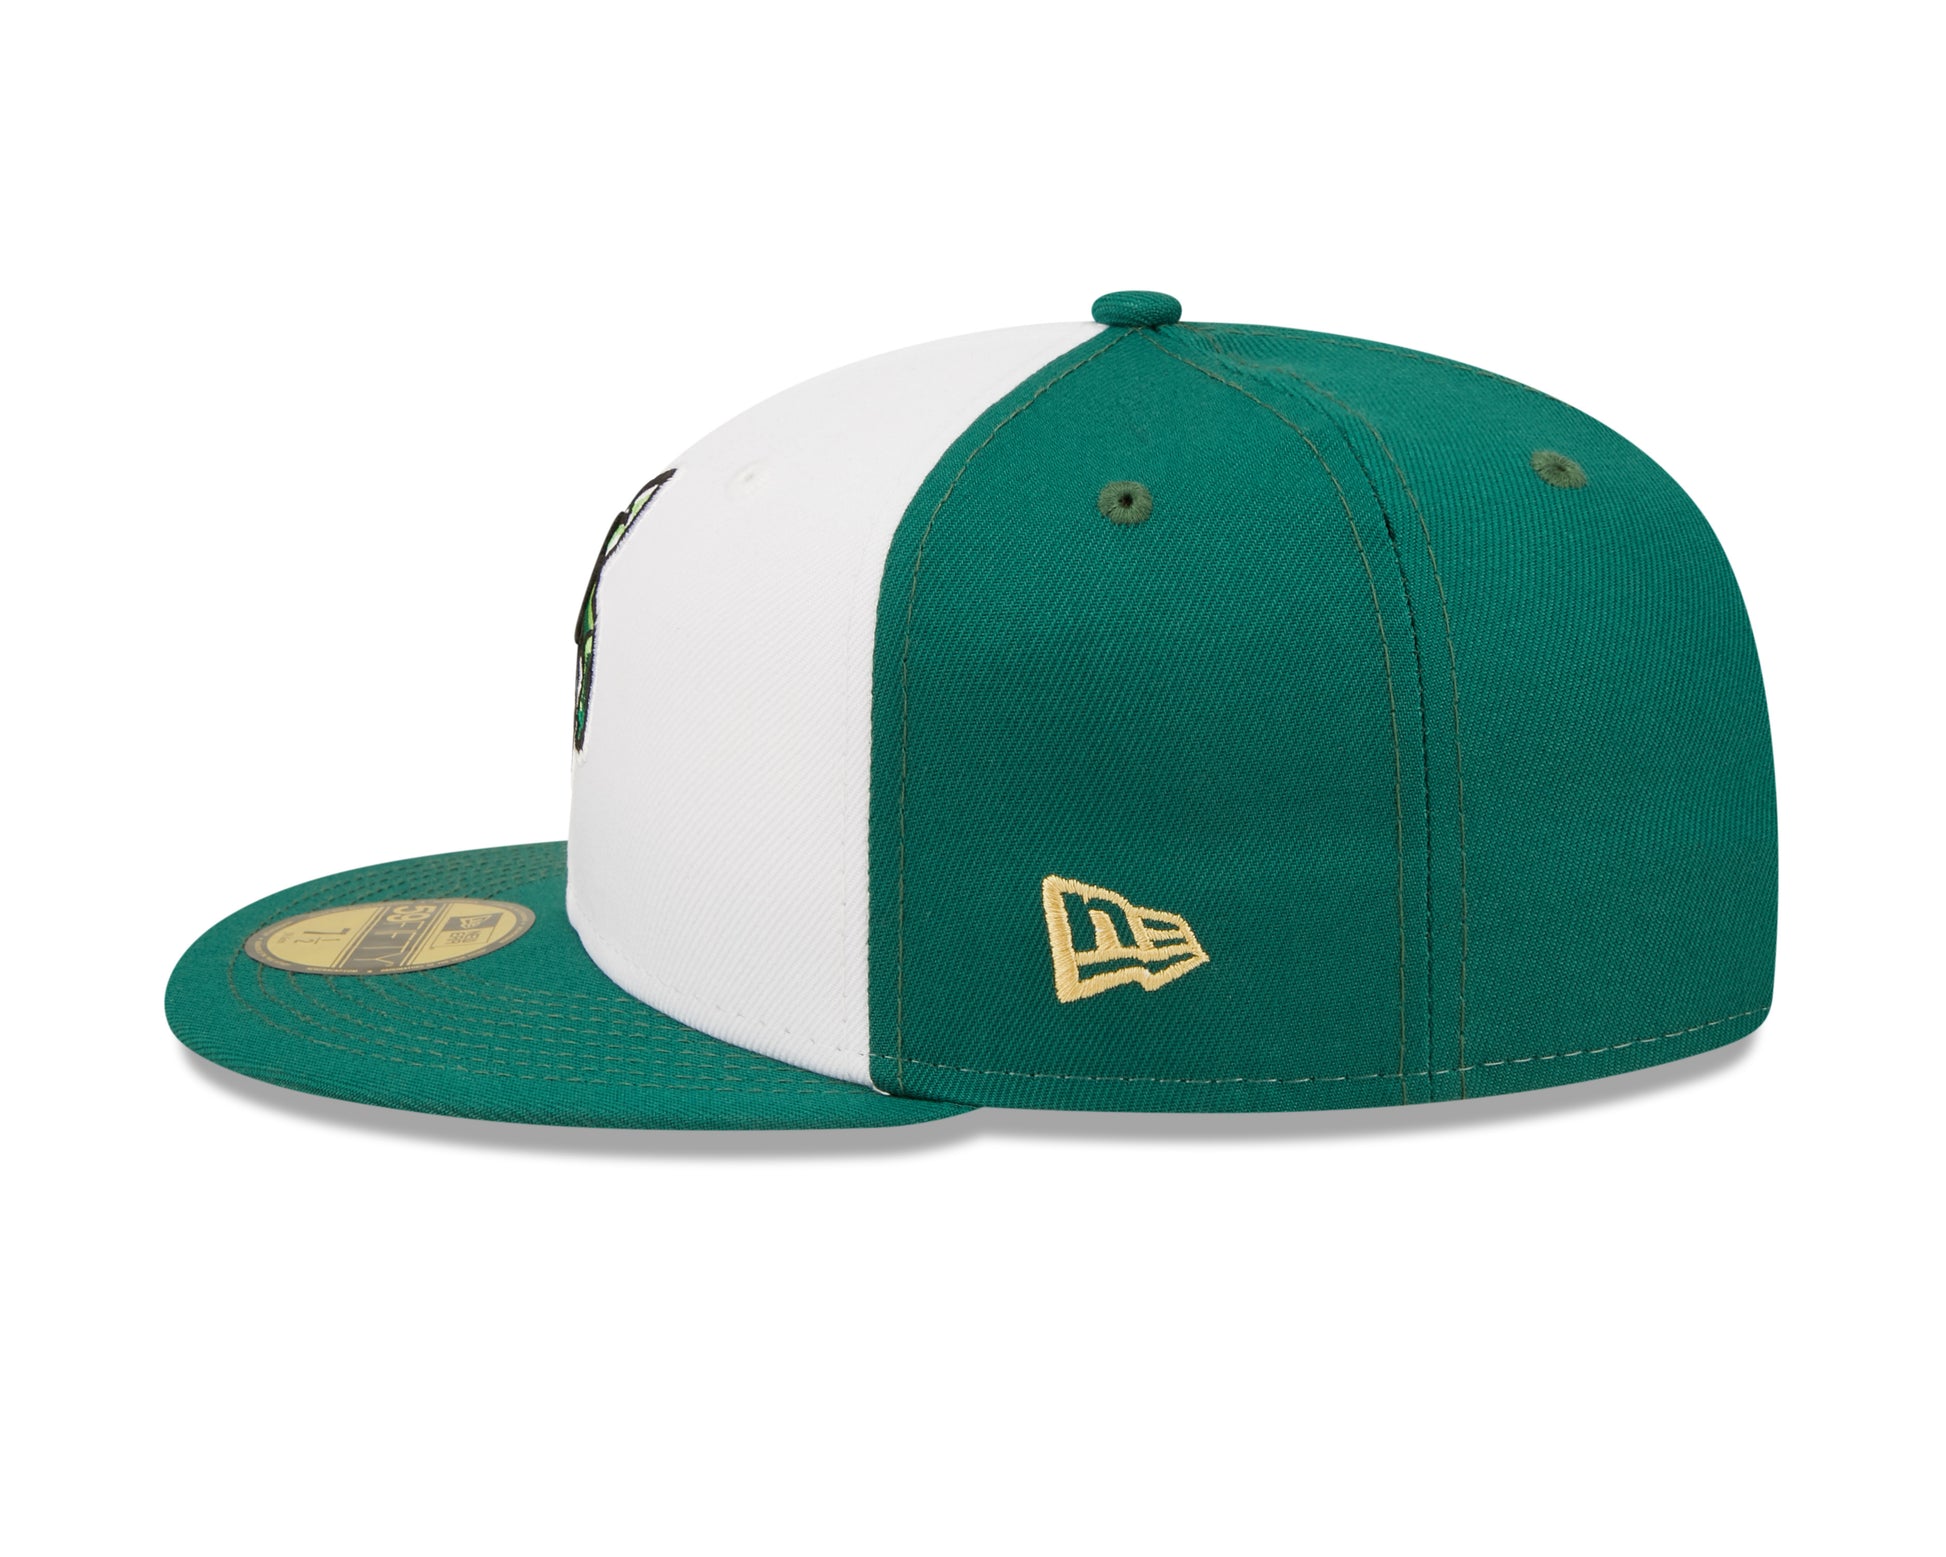 New Era - 59fifty Fitted - MiLB - AC Perf - Augusta Green Jackets - Black - Headz Up 